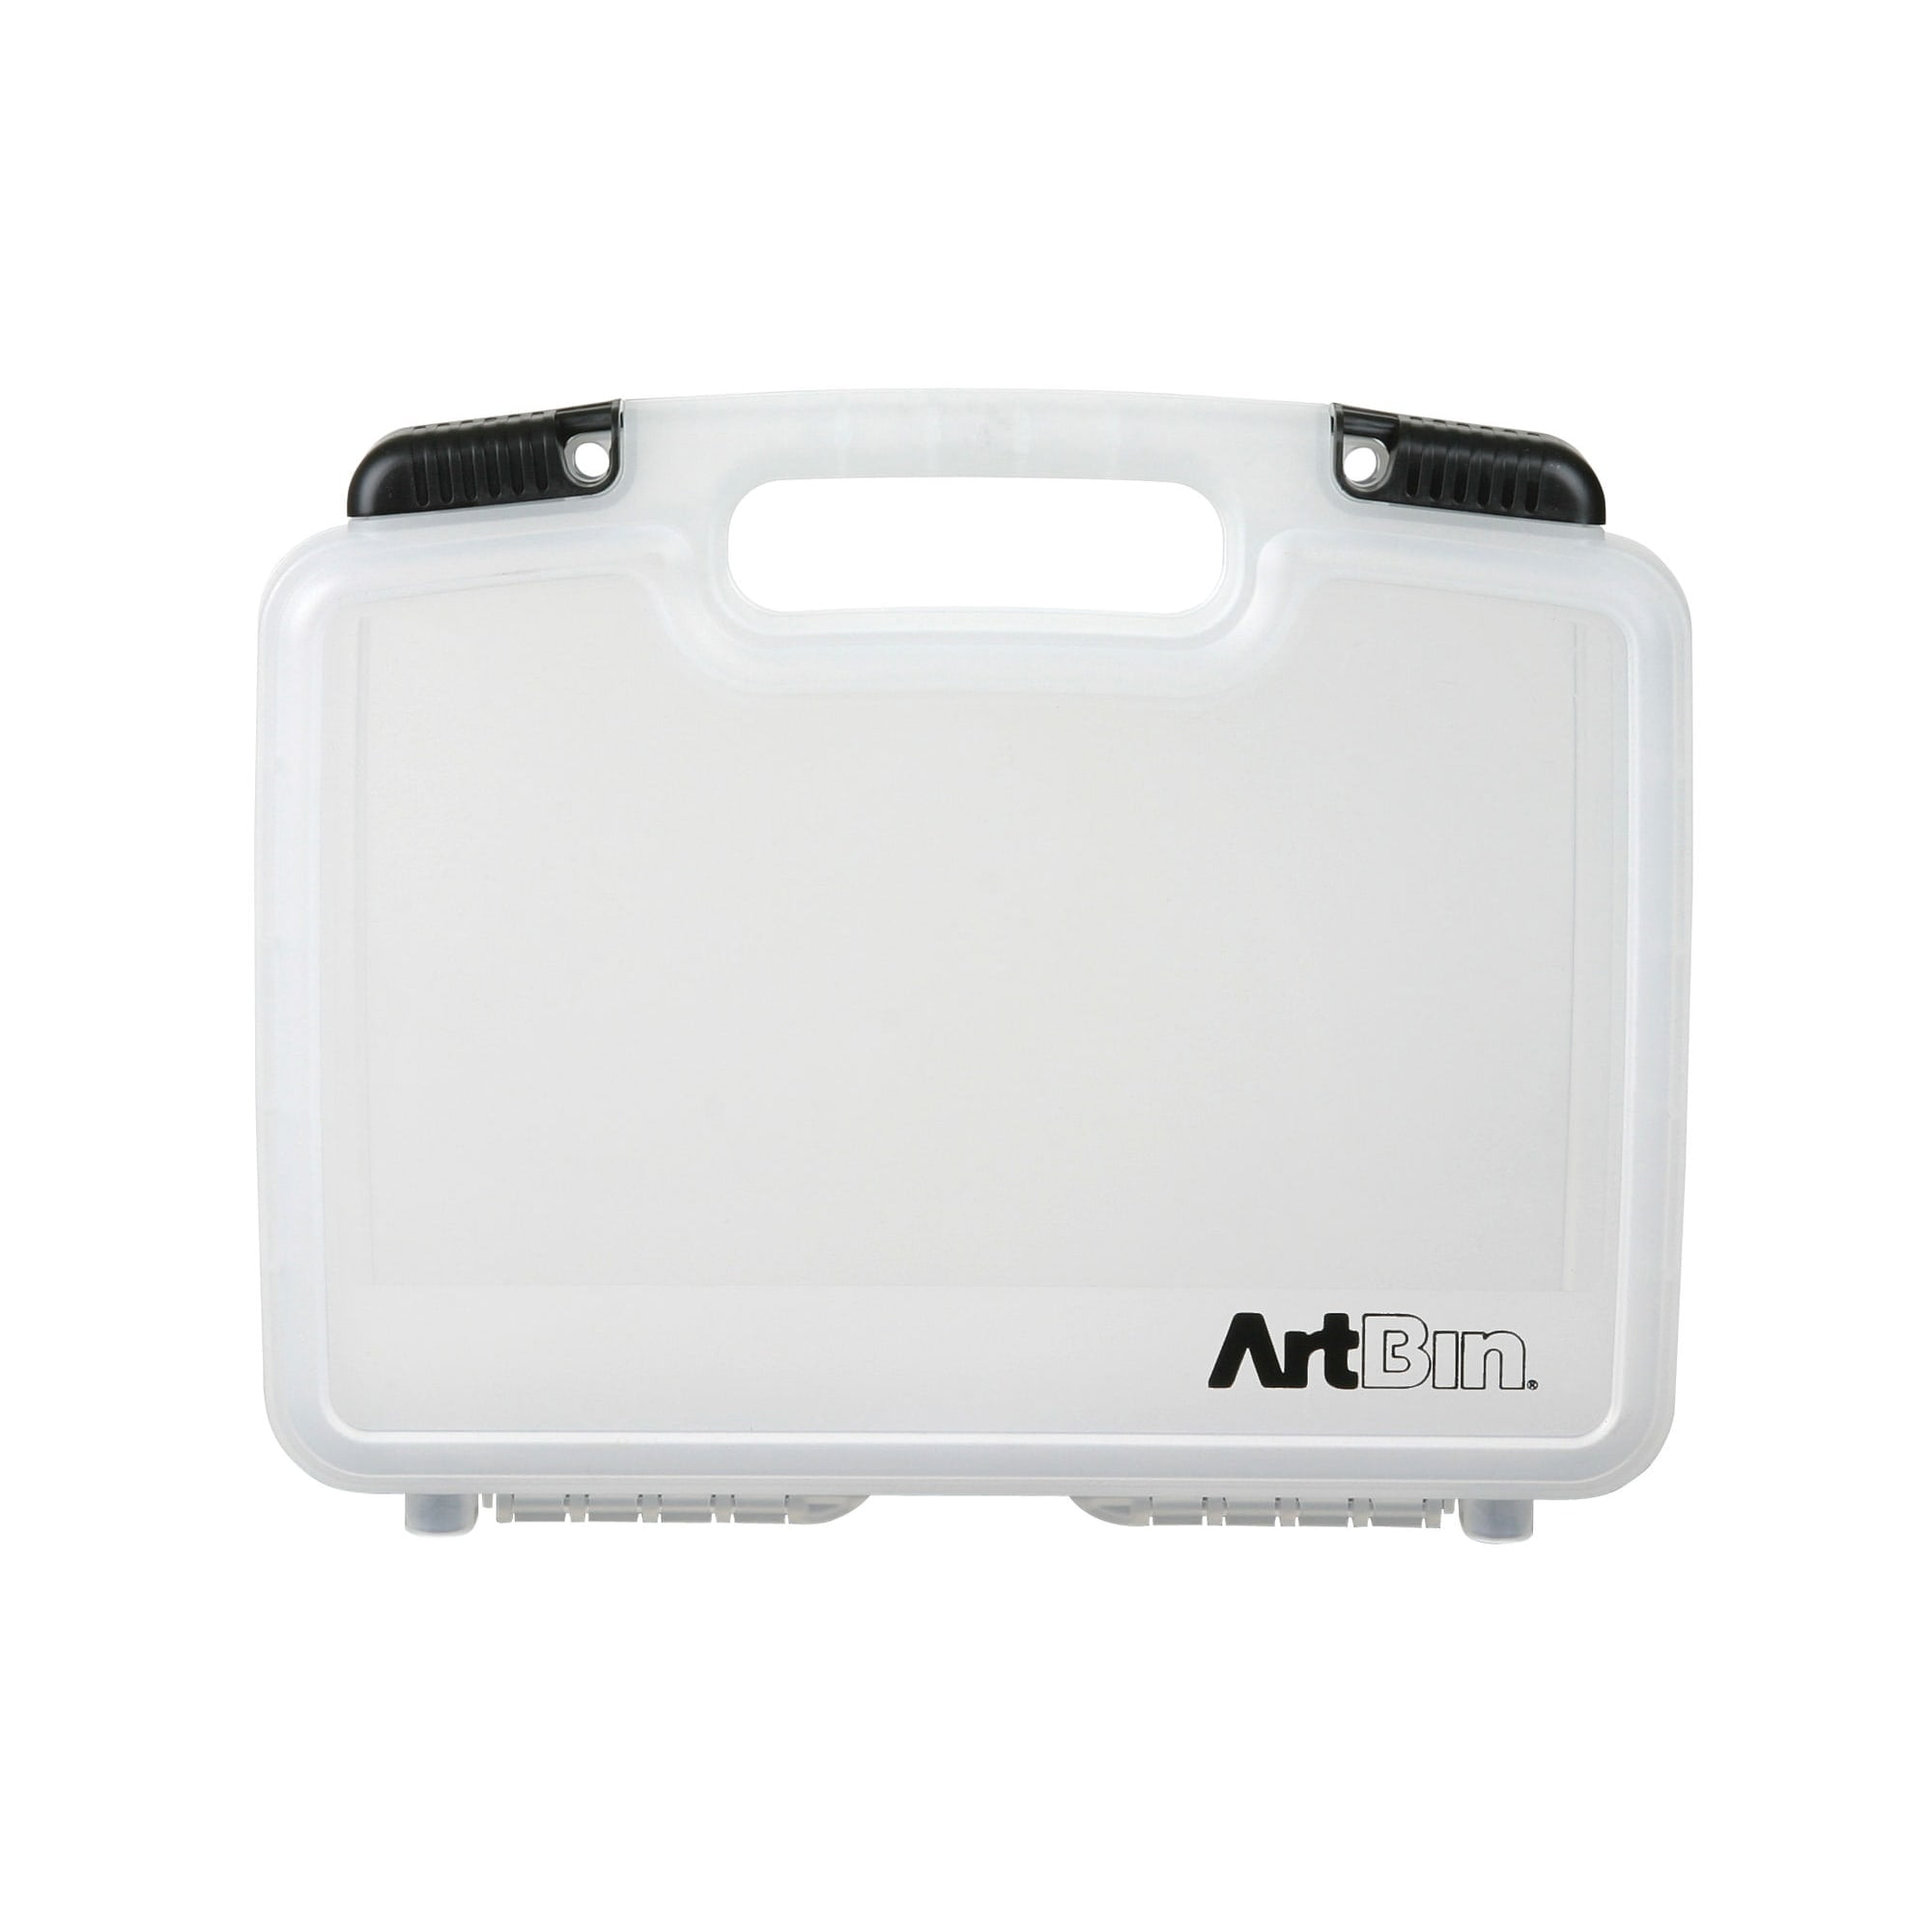 ArtBin Quick View Carrying Case 15X3.25X14.375 Translucent